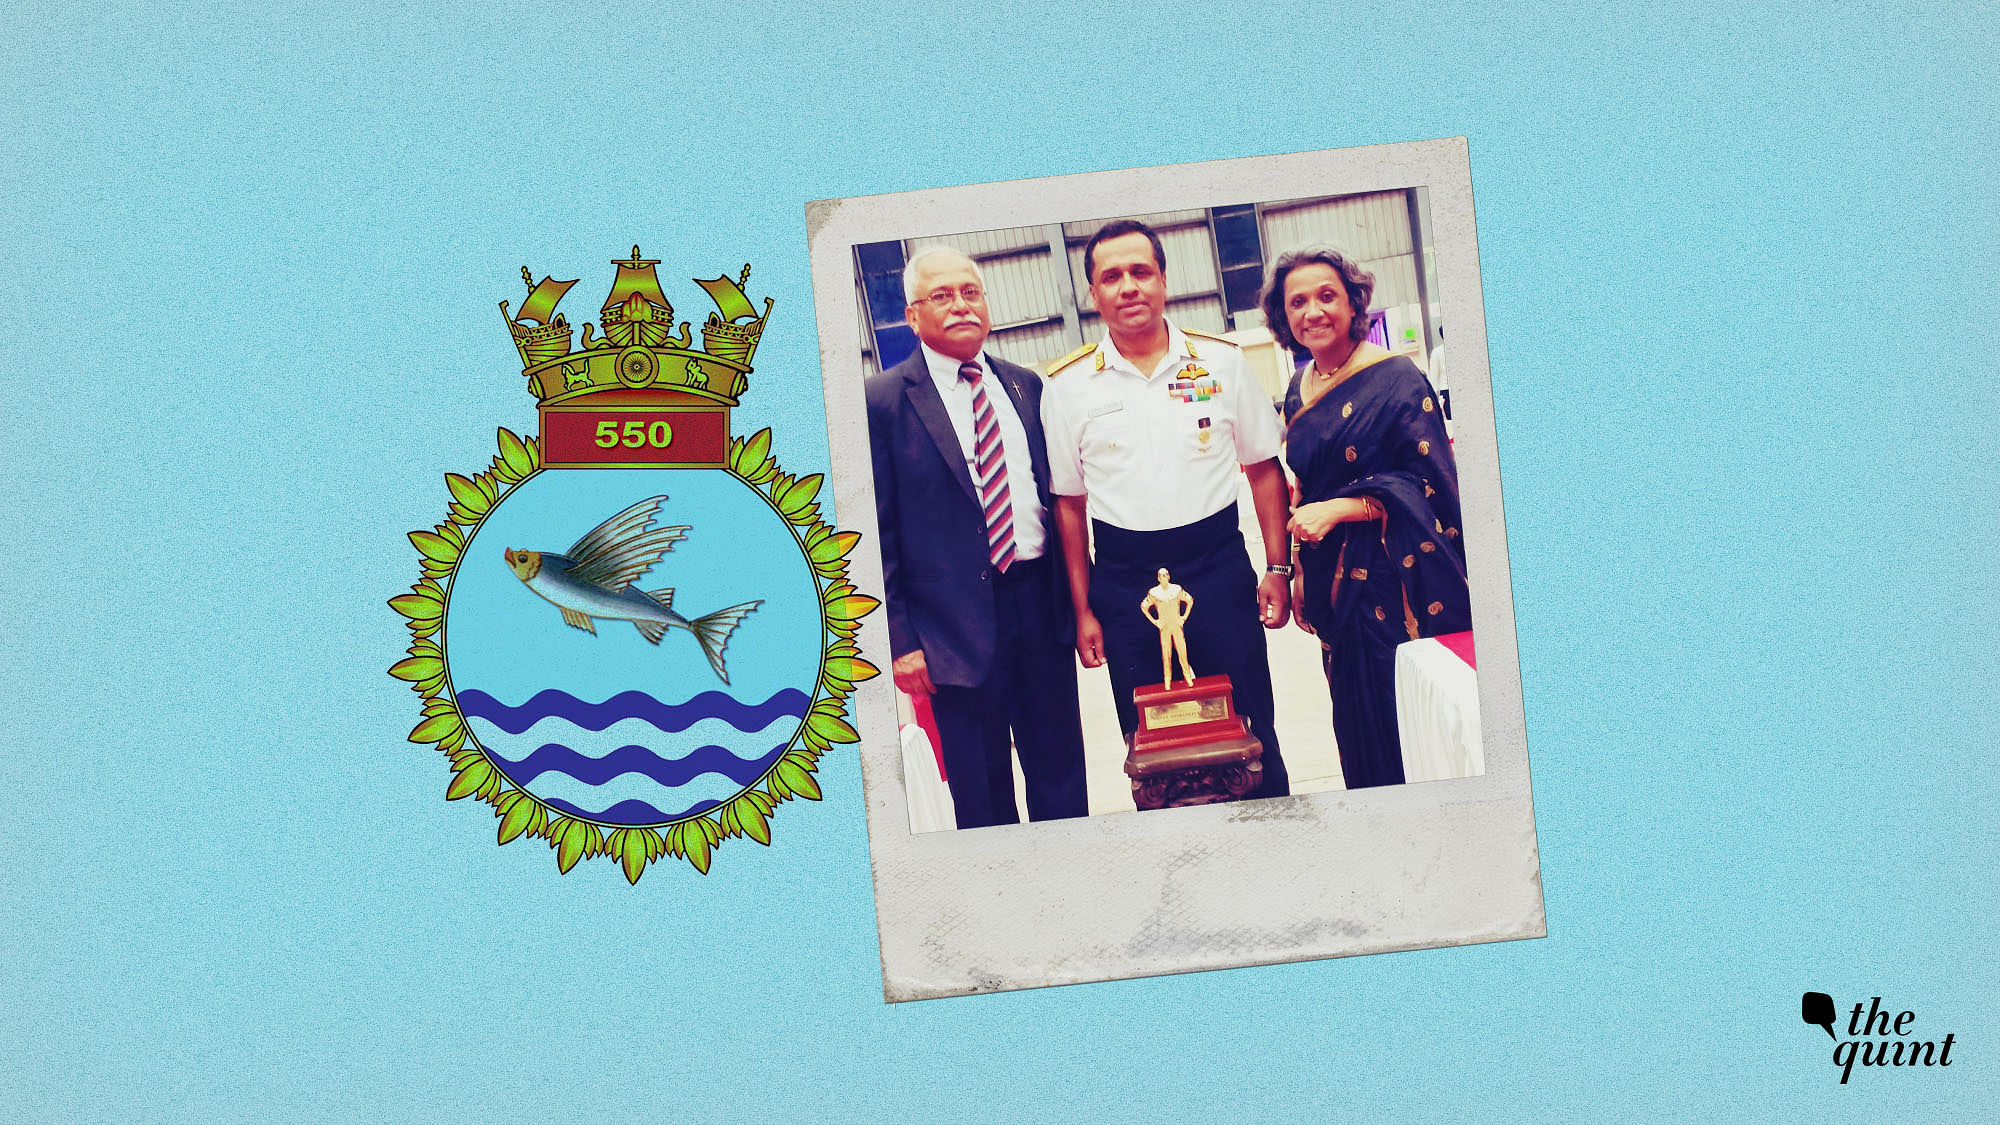 Image of INAS 550 insignia, and the picture of deceased pilot Lt Simon George Pynumootil’s family, along with the trophy instituted in his name.